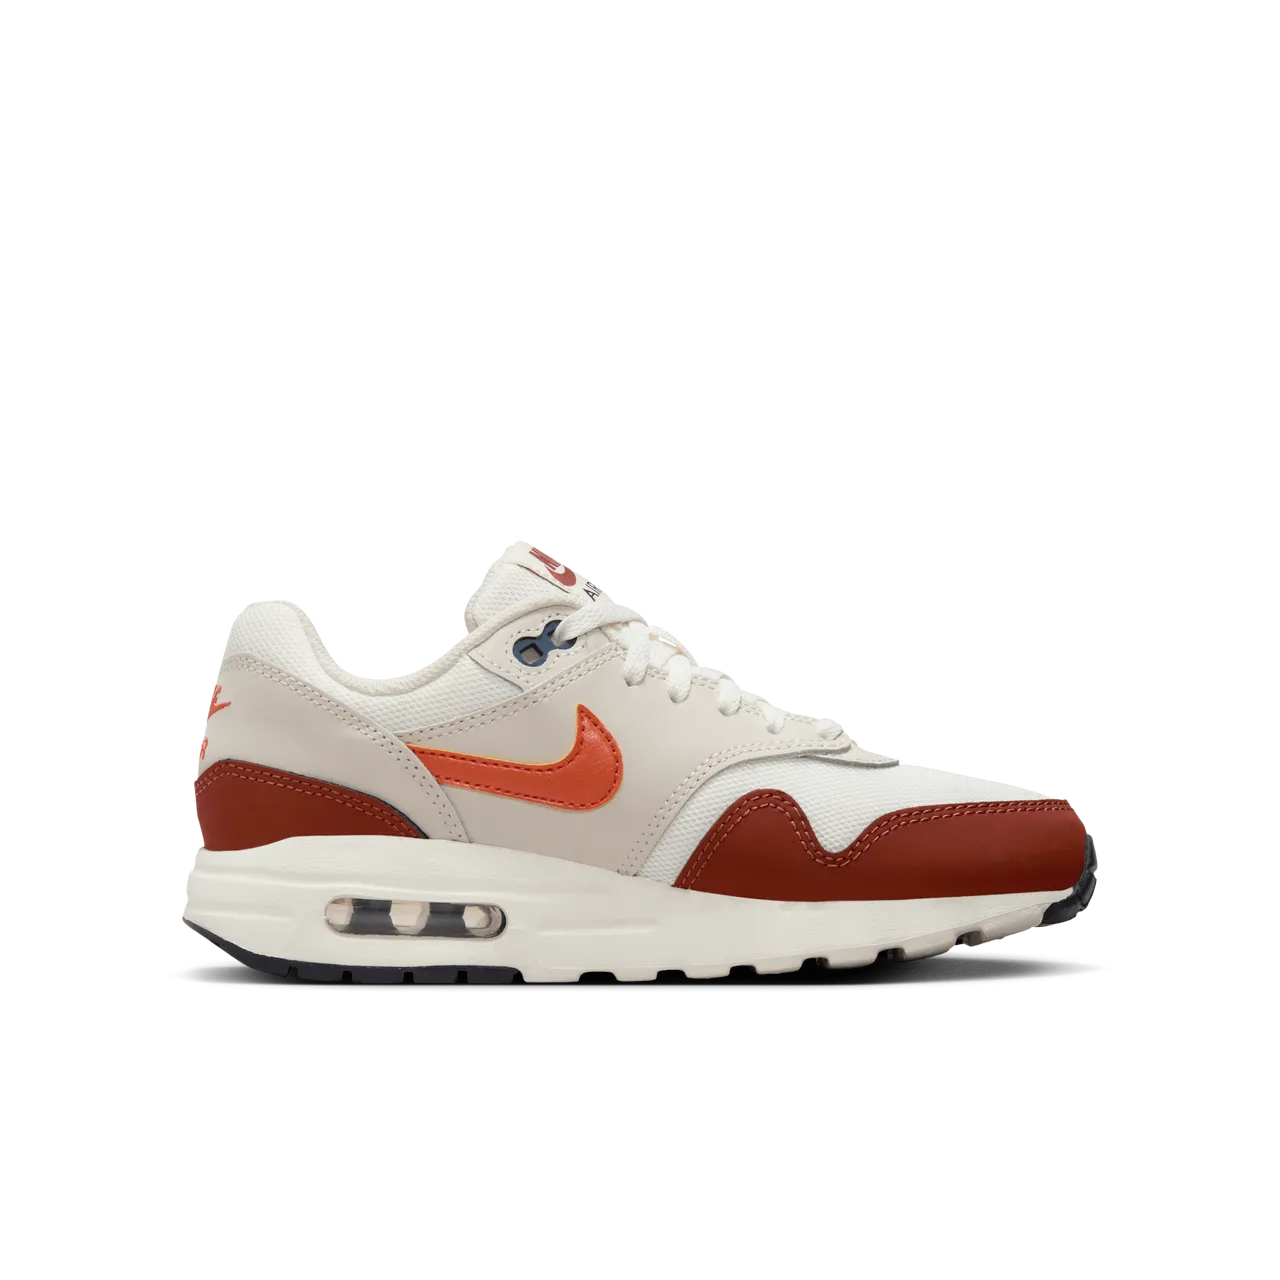 Air Max 1 Older Kids' Shoes - White